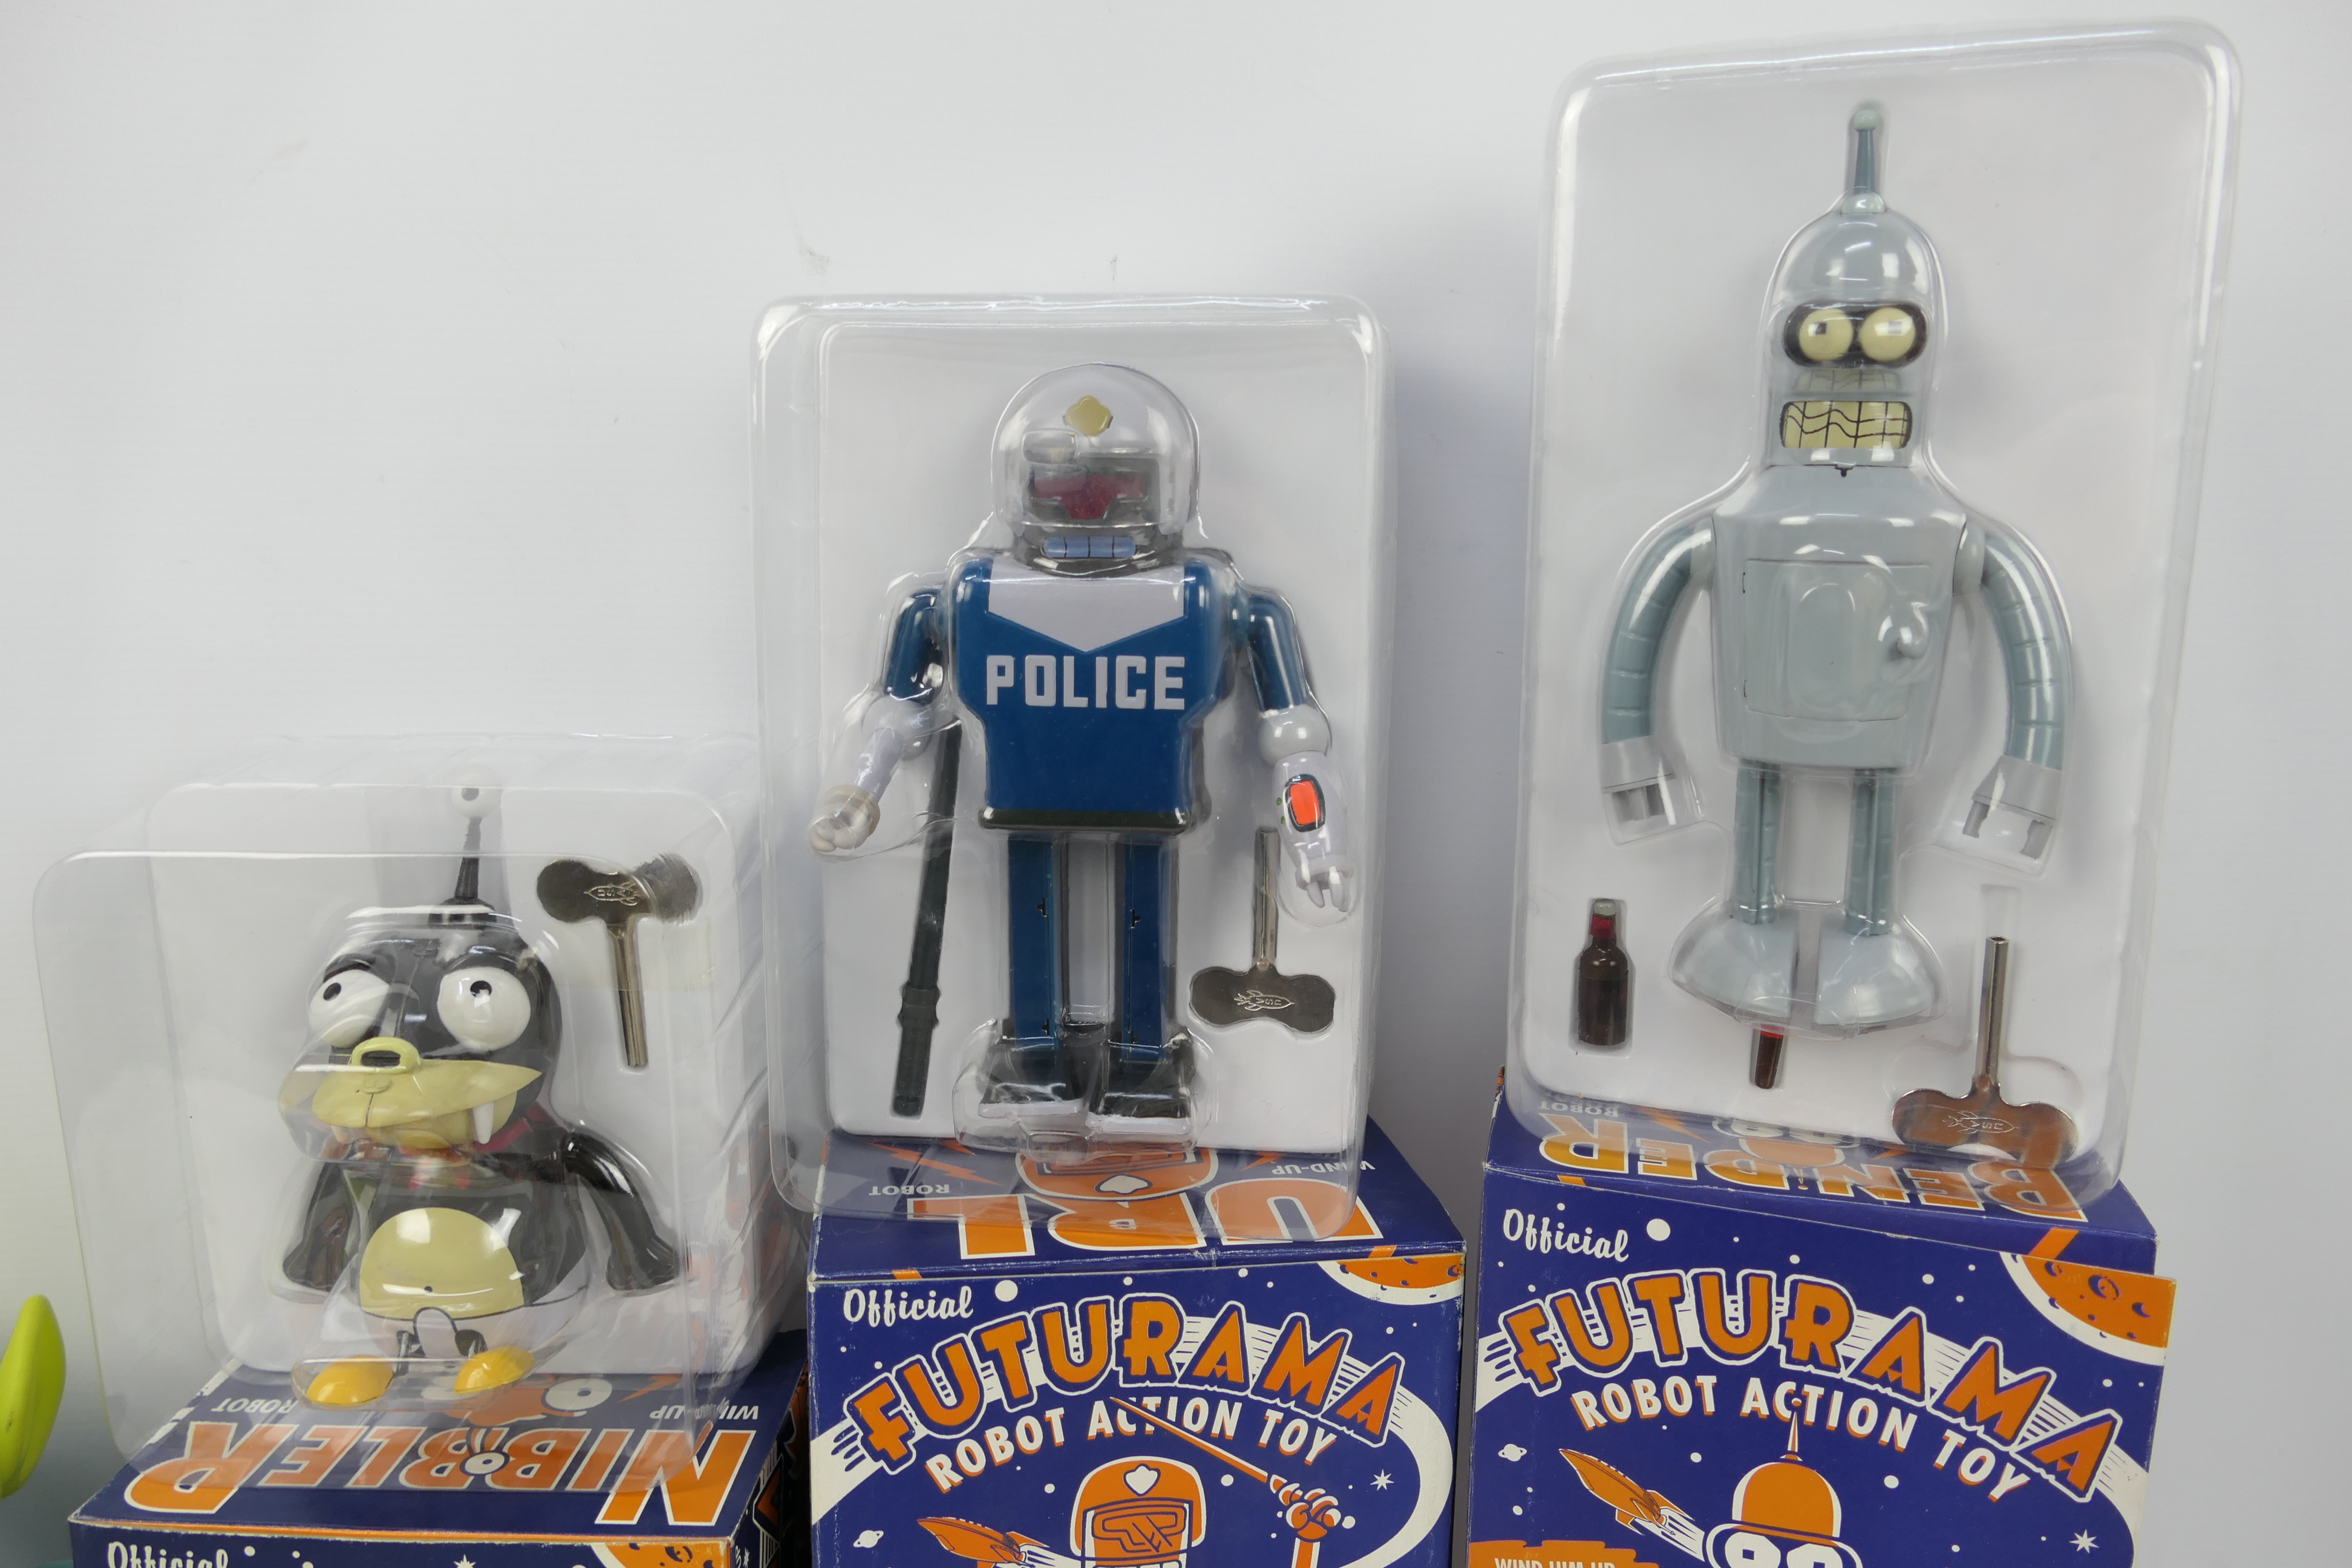 Futurama - Pixar - 3 x boxed wind up robots from the Futurama series, Bender, Nibbler and URL, - Image 3 of 4